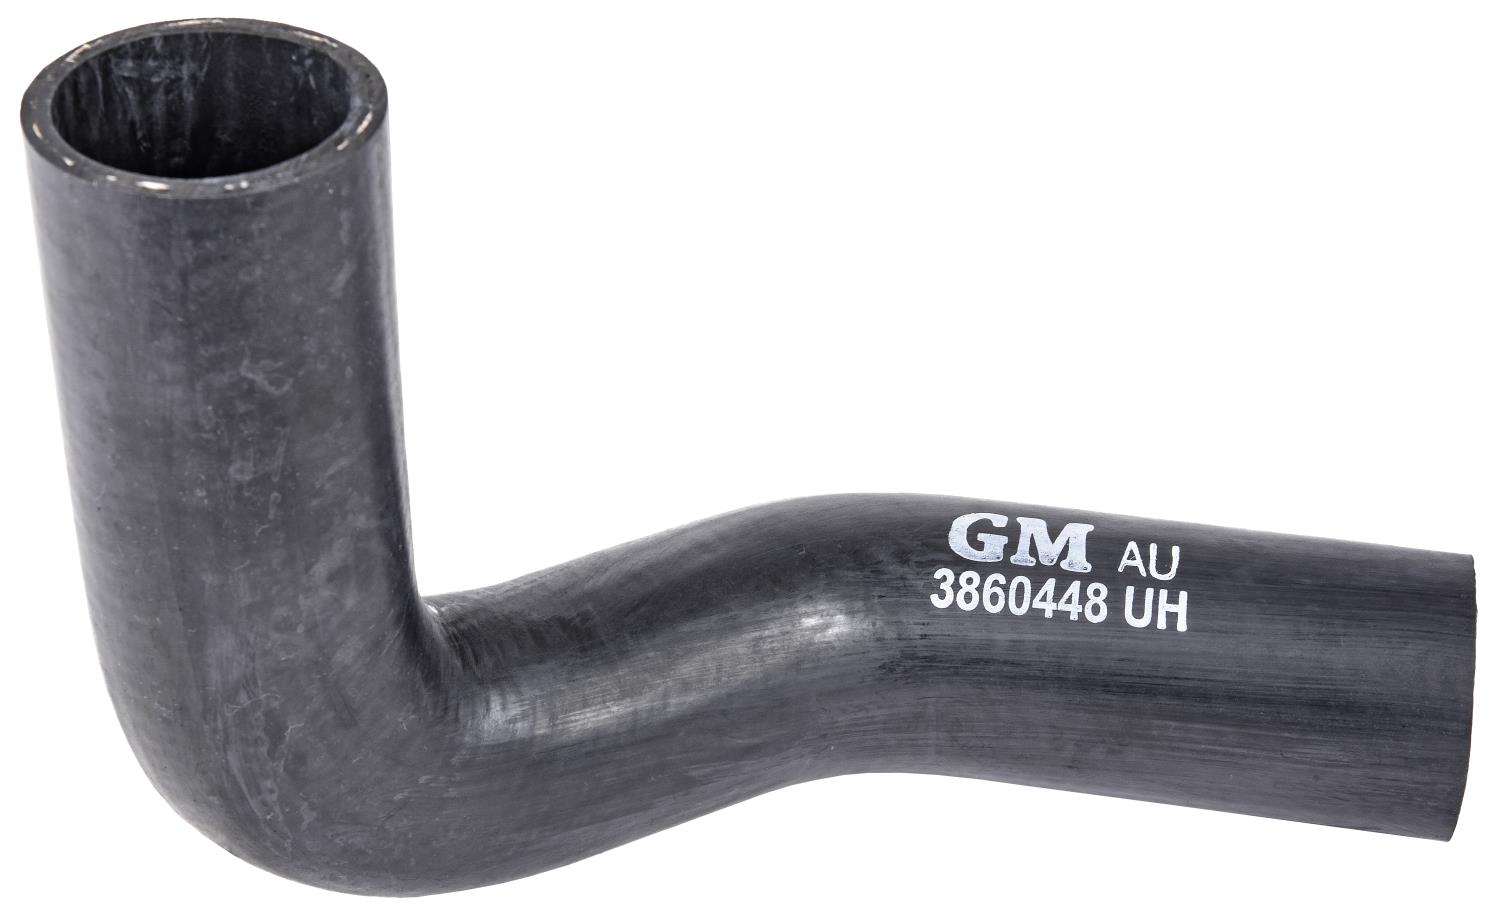 Lower Radiator Hose for 1965-1968 Chevrolet Fullsize [Direct-Fit Replacement for GM 3860448]